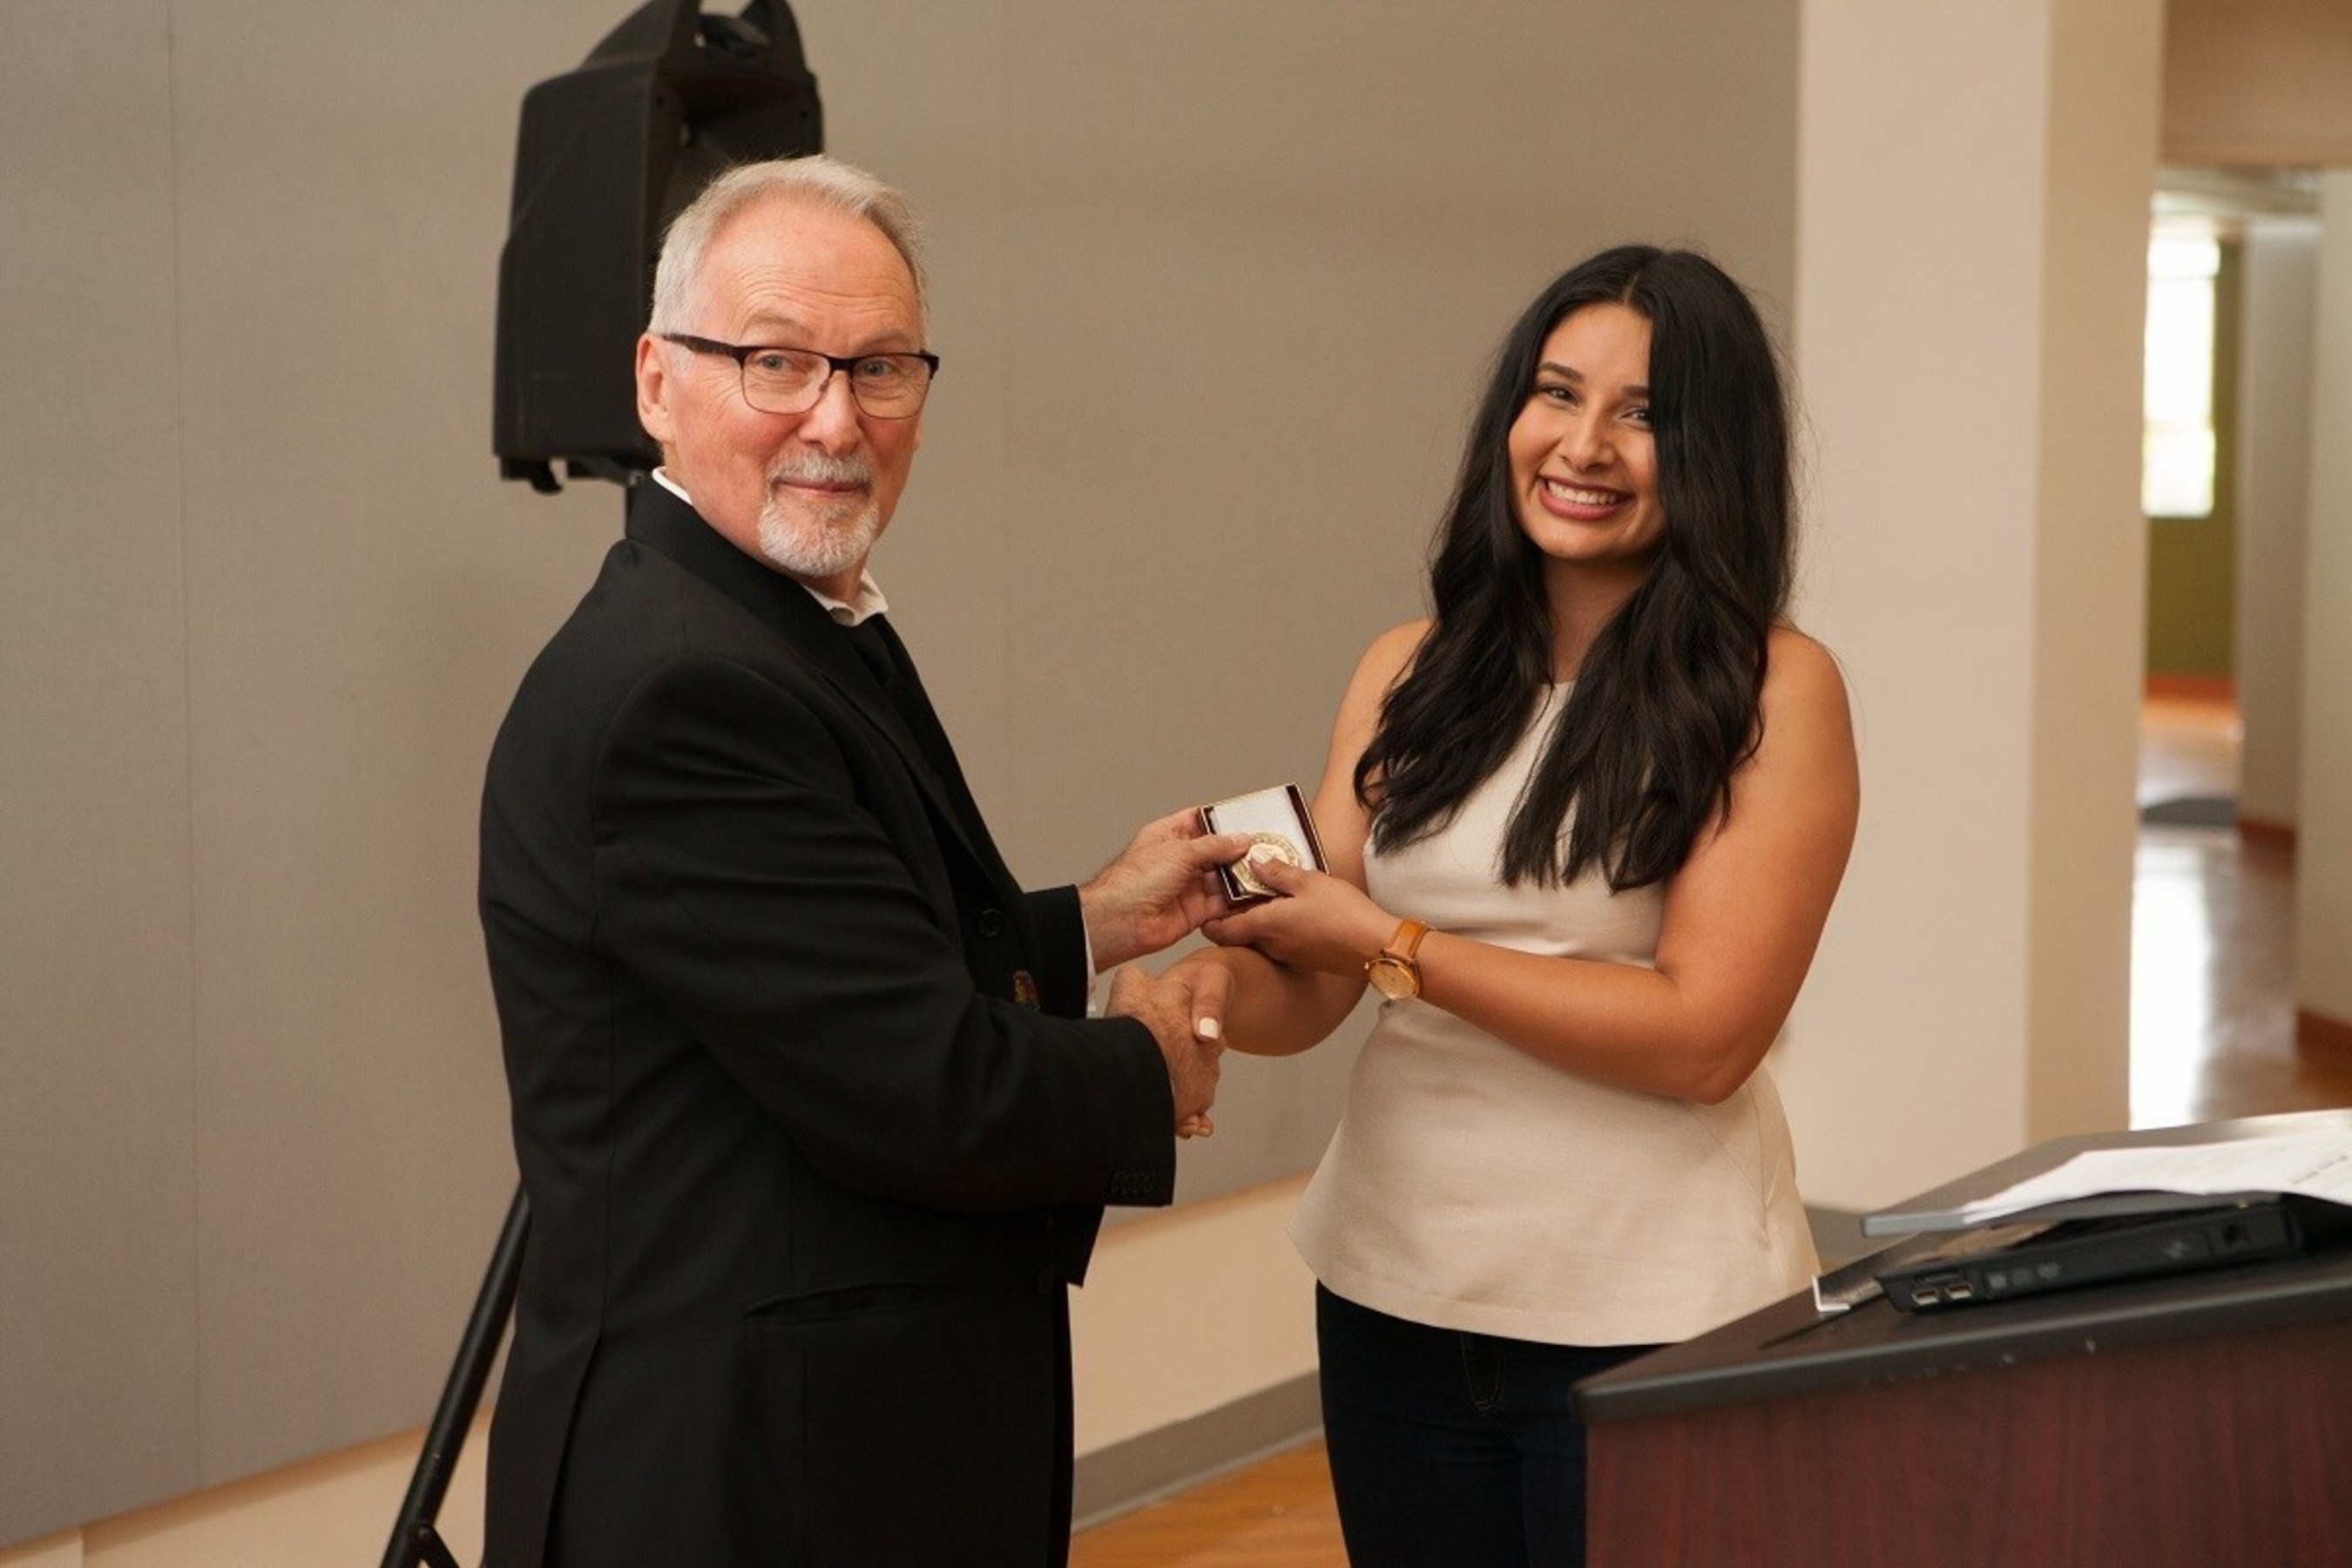 Harpreet Basi, of Sanger, California, receives the prestigious Alpha Rho Chi Medal from Len Zegarski, Chair, Undergraduate Architecture for NewSchool of Architecture & Design in San Diego. Since 1931, the Alpha Rho Chi Medal recognizes graduating architecture students for their leadership and service and for what they have to offer to the future of the profession with the Alpha Rho Chi Medal.